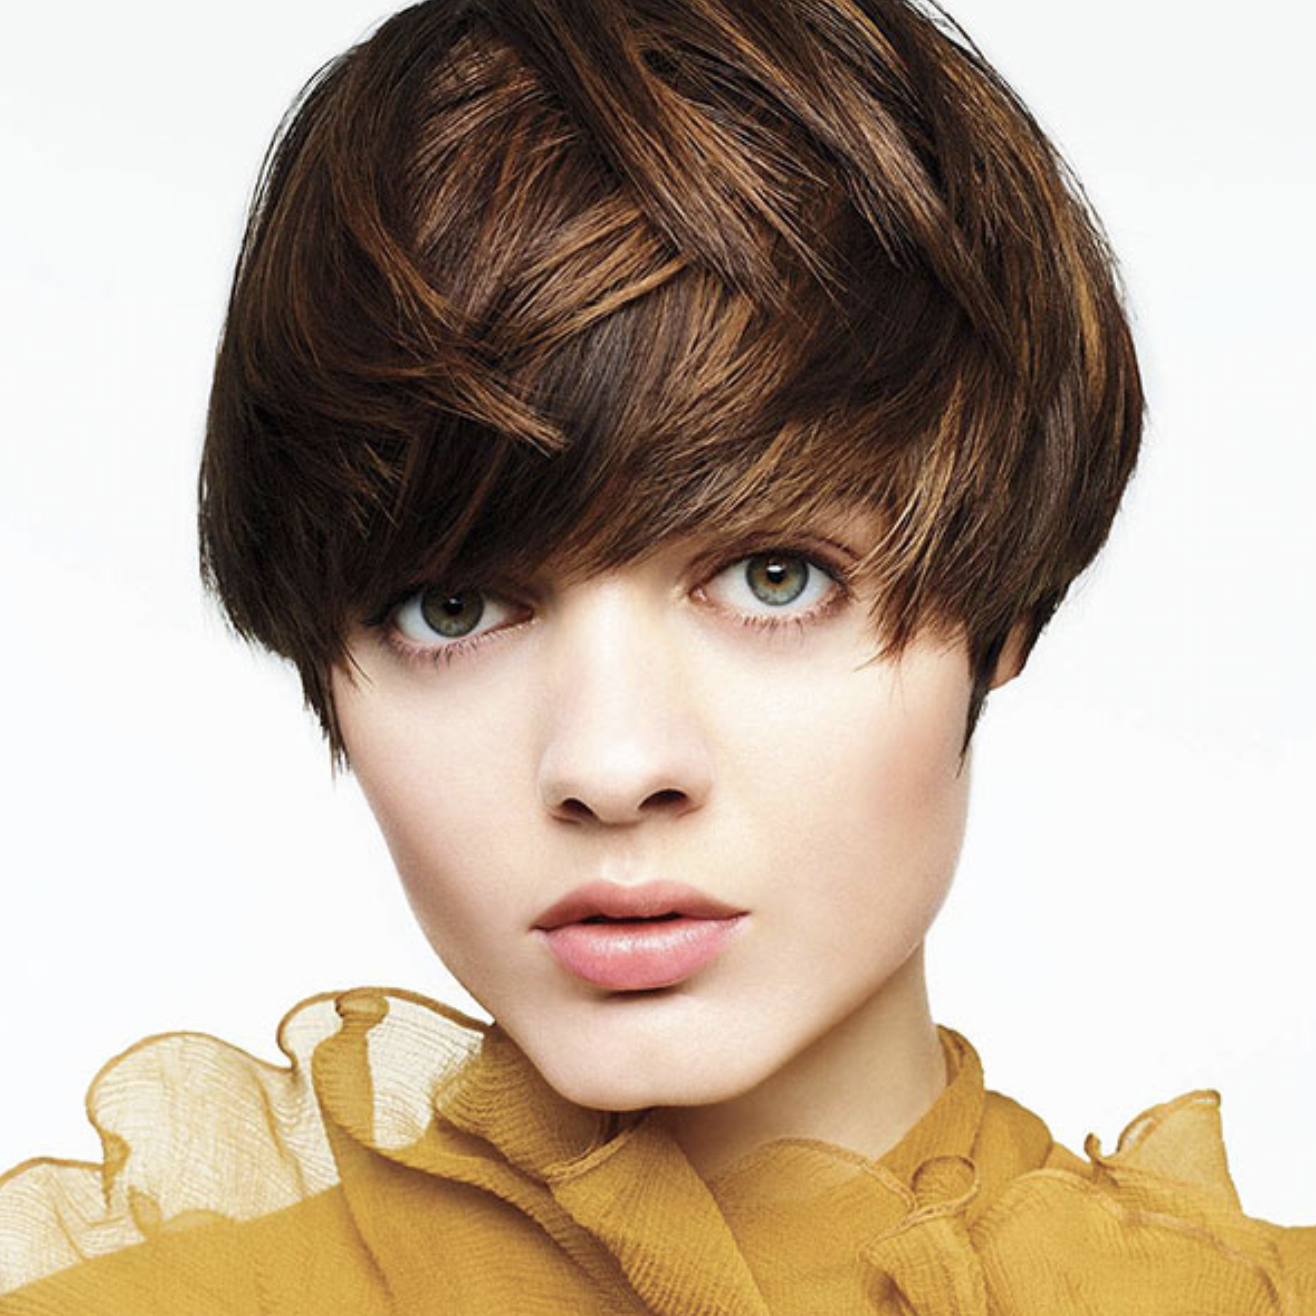 40+ BEST SHORT STRAIGHT HAIRSTYLE IDEAS FOR WOMEN ...